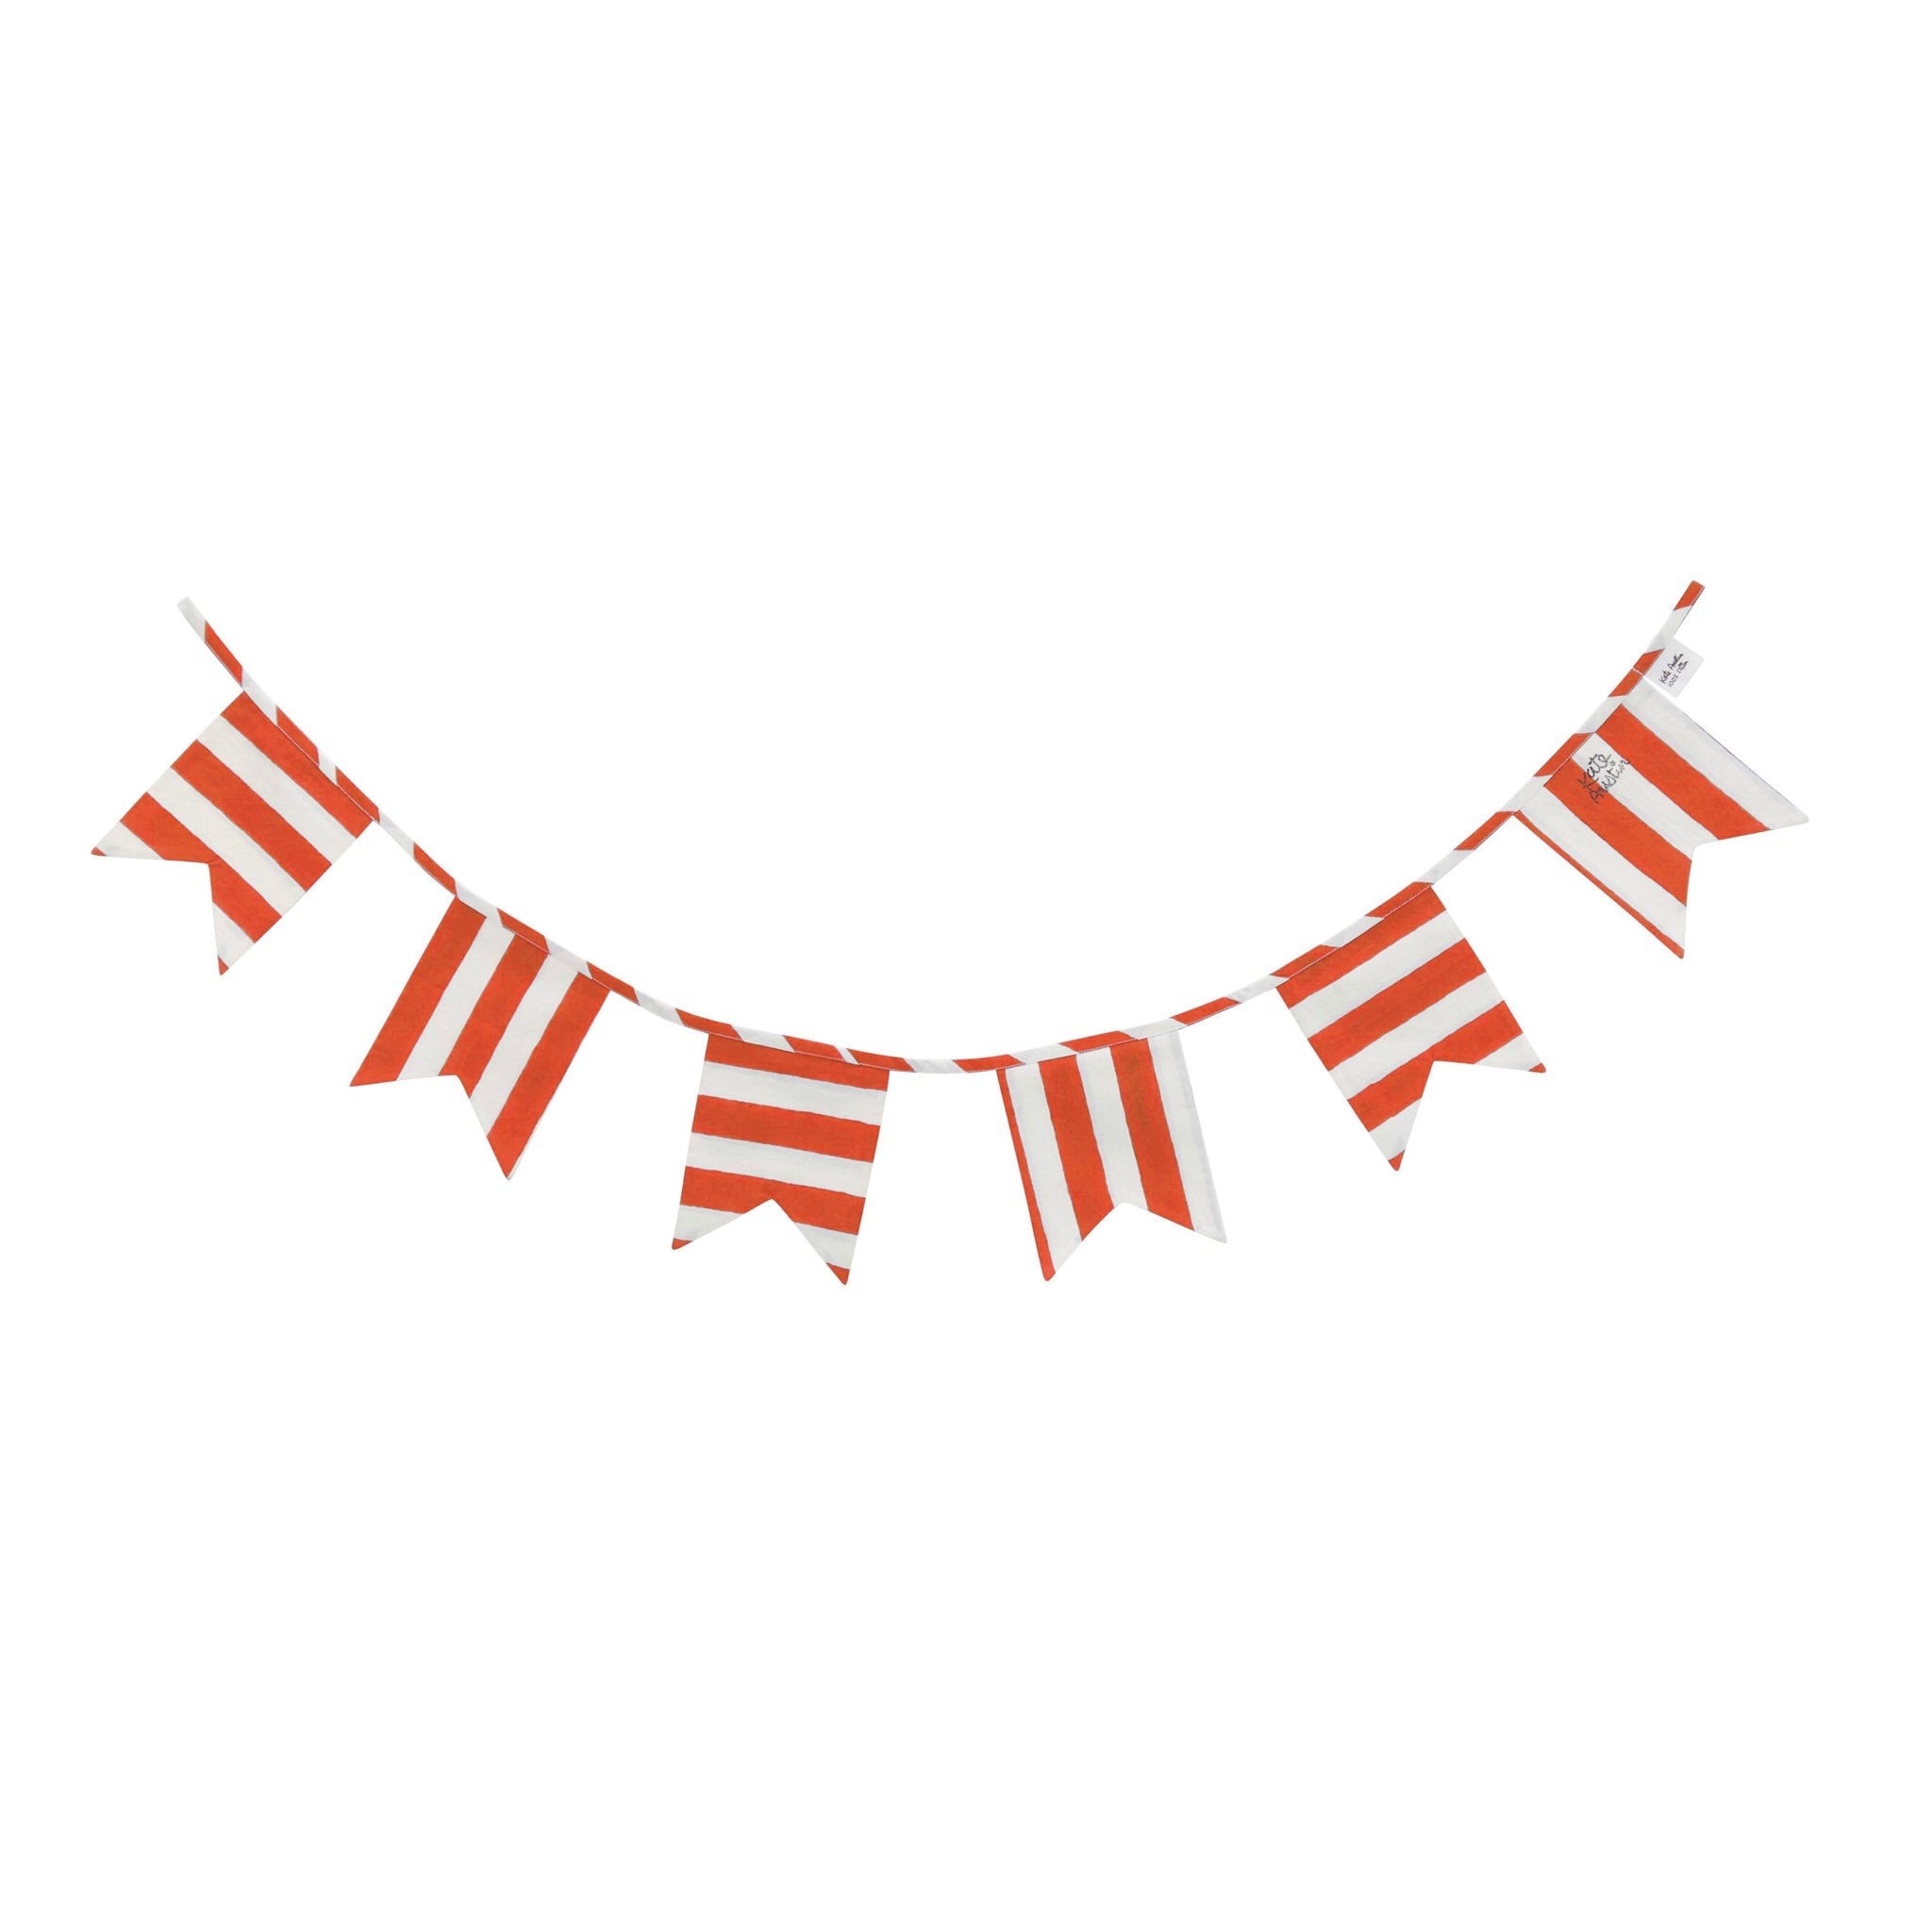 Block Printed Cloth Bunting in Red White Cabana Stripe